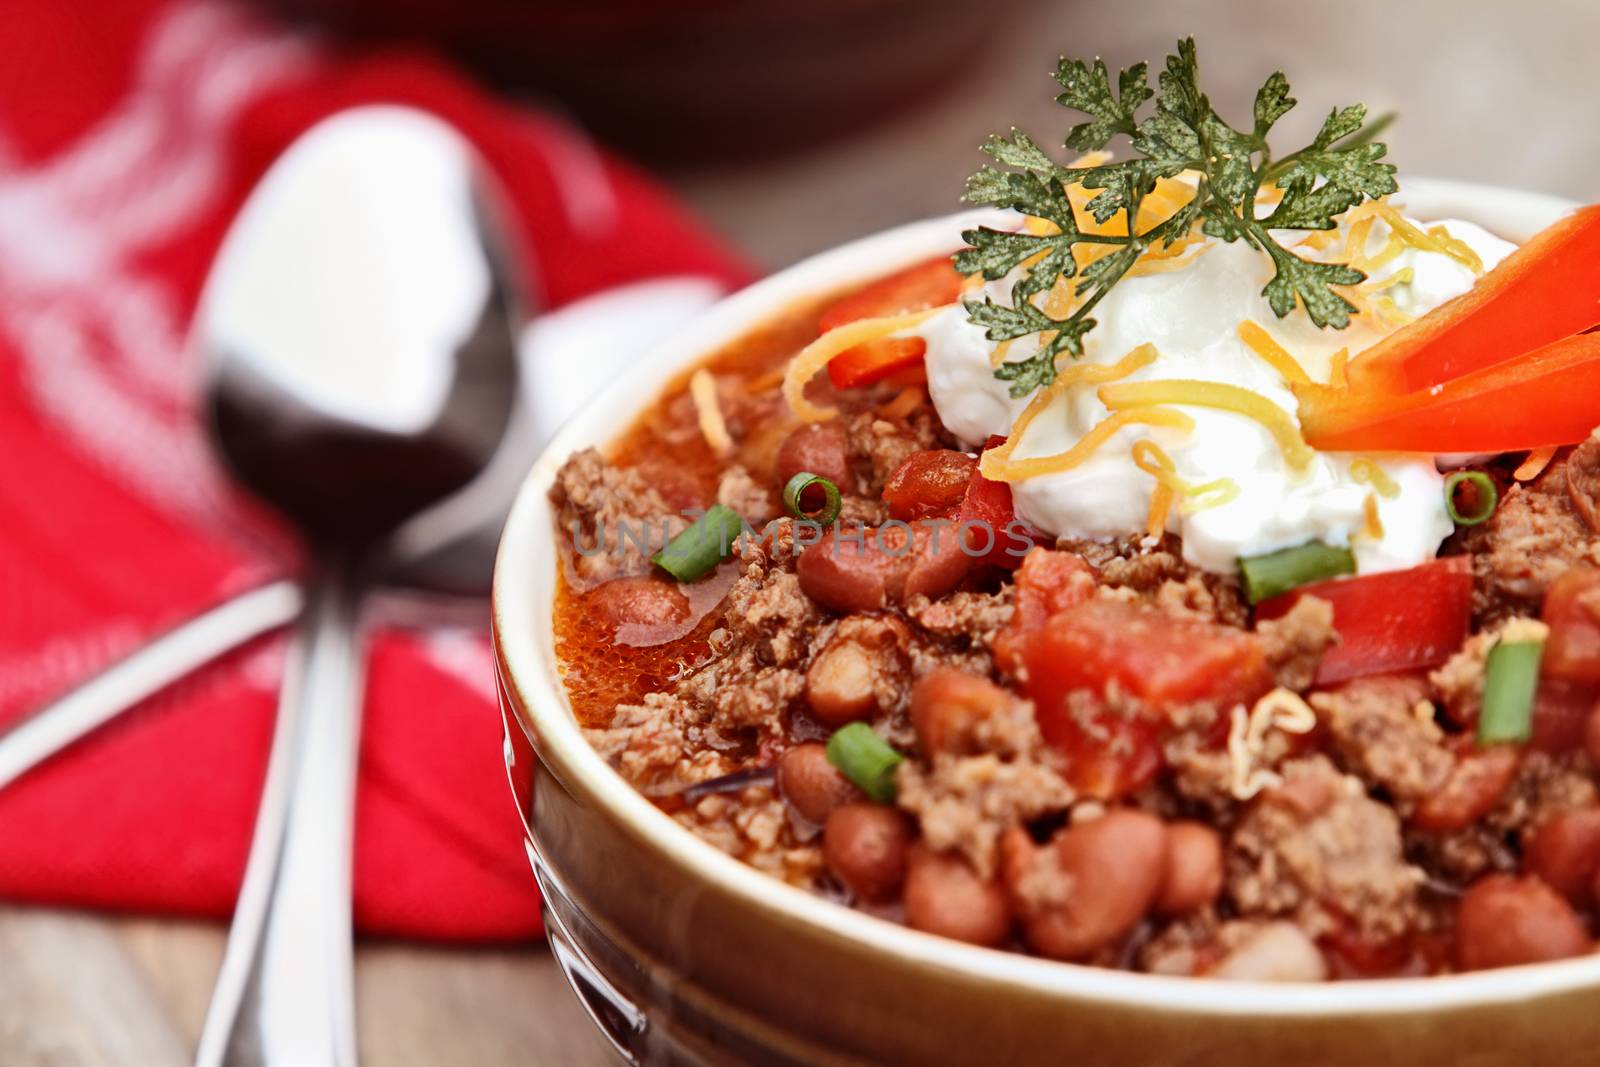 Bowl of Chili Con Carne by StephanieFrey